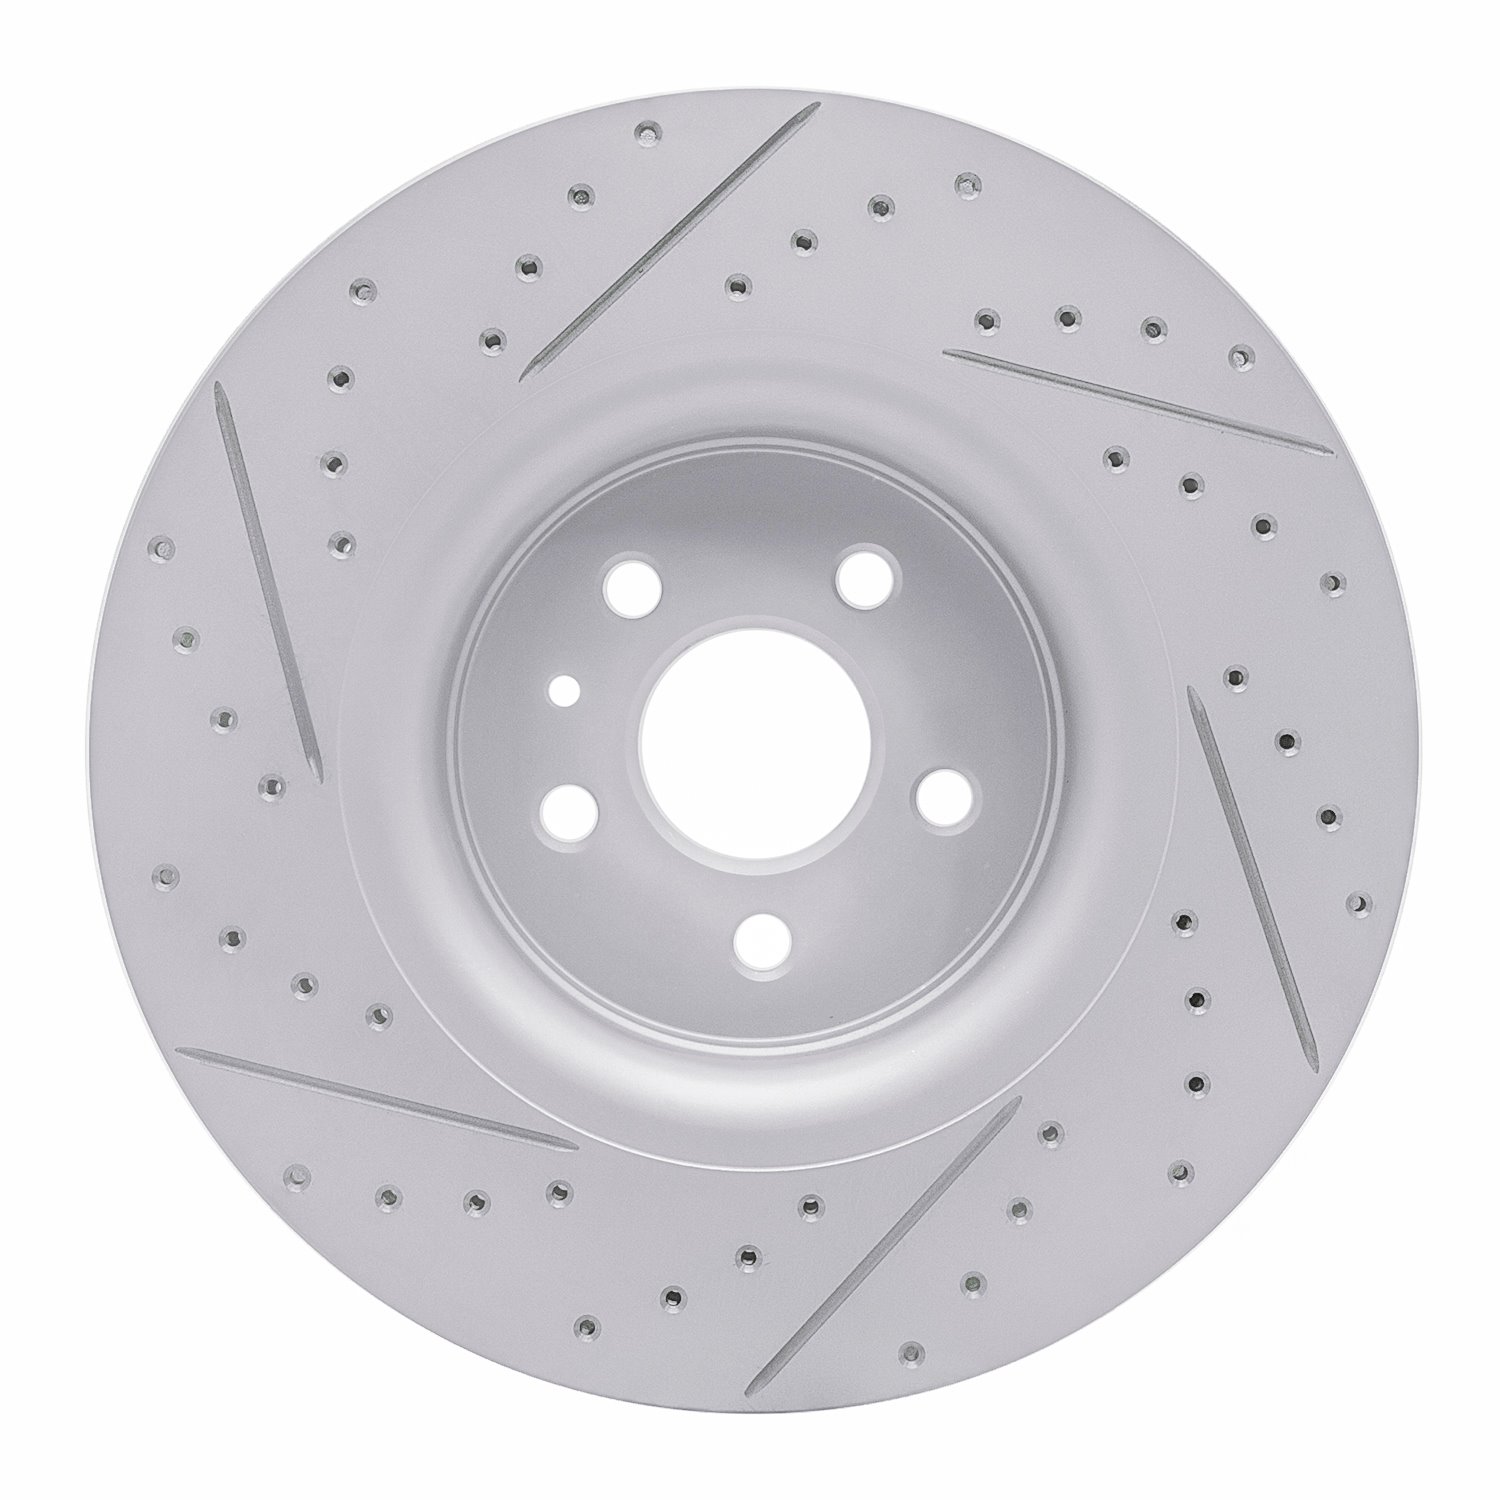 Geoperformance Drilled/Slotted Brake Rotor, Fits Select